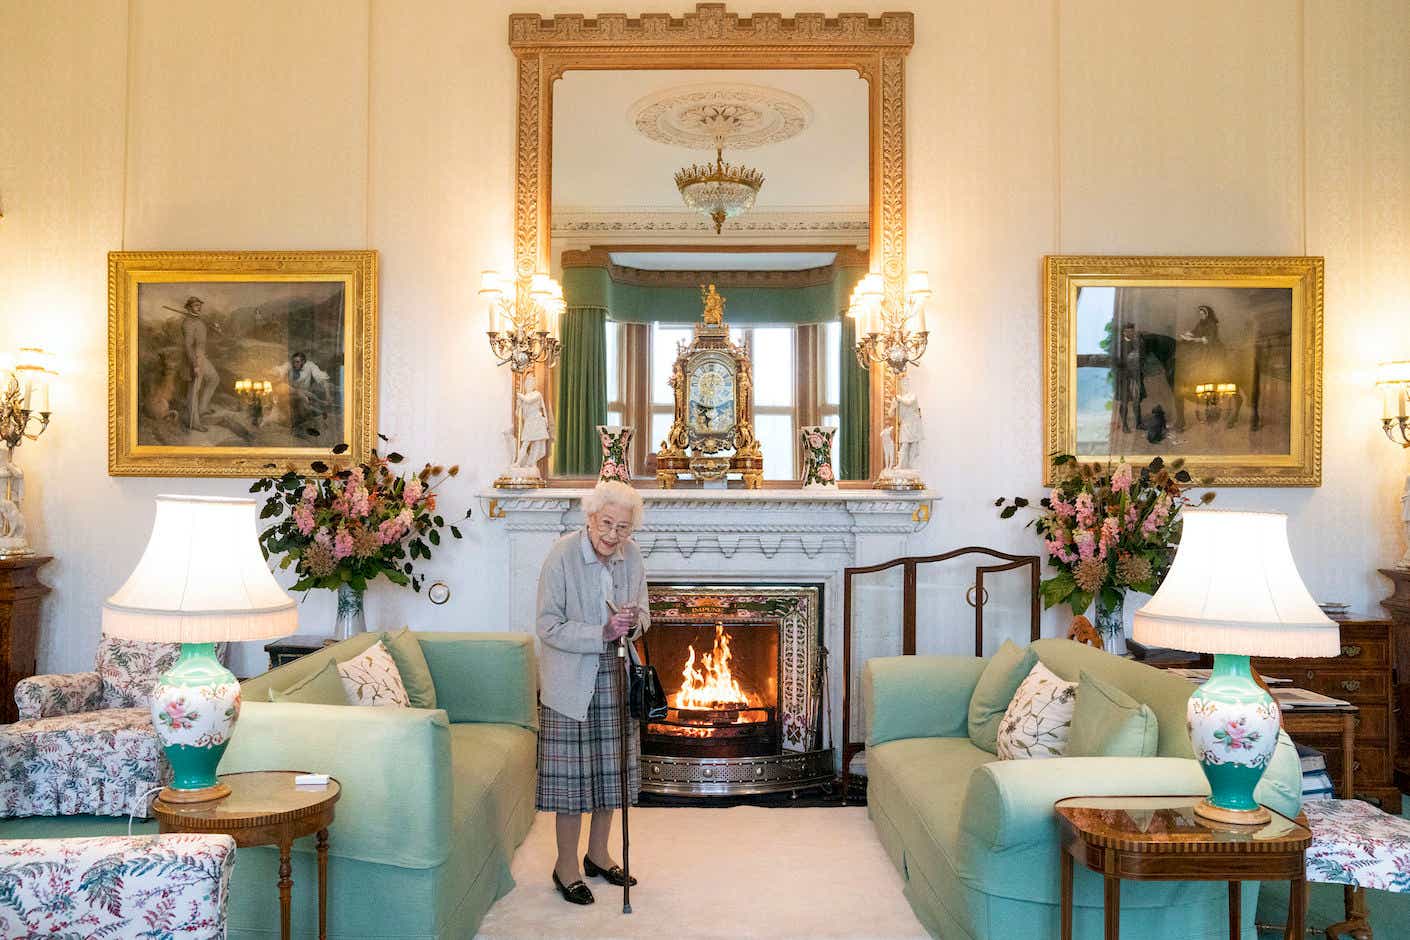 Queen Elizabeth II waits in the Drawing Room before receiving newly elected leader of the Conservative party Liz Truss at Balmoral Castle on September 6, 2022.